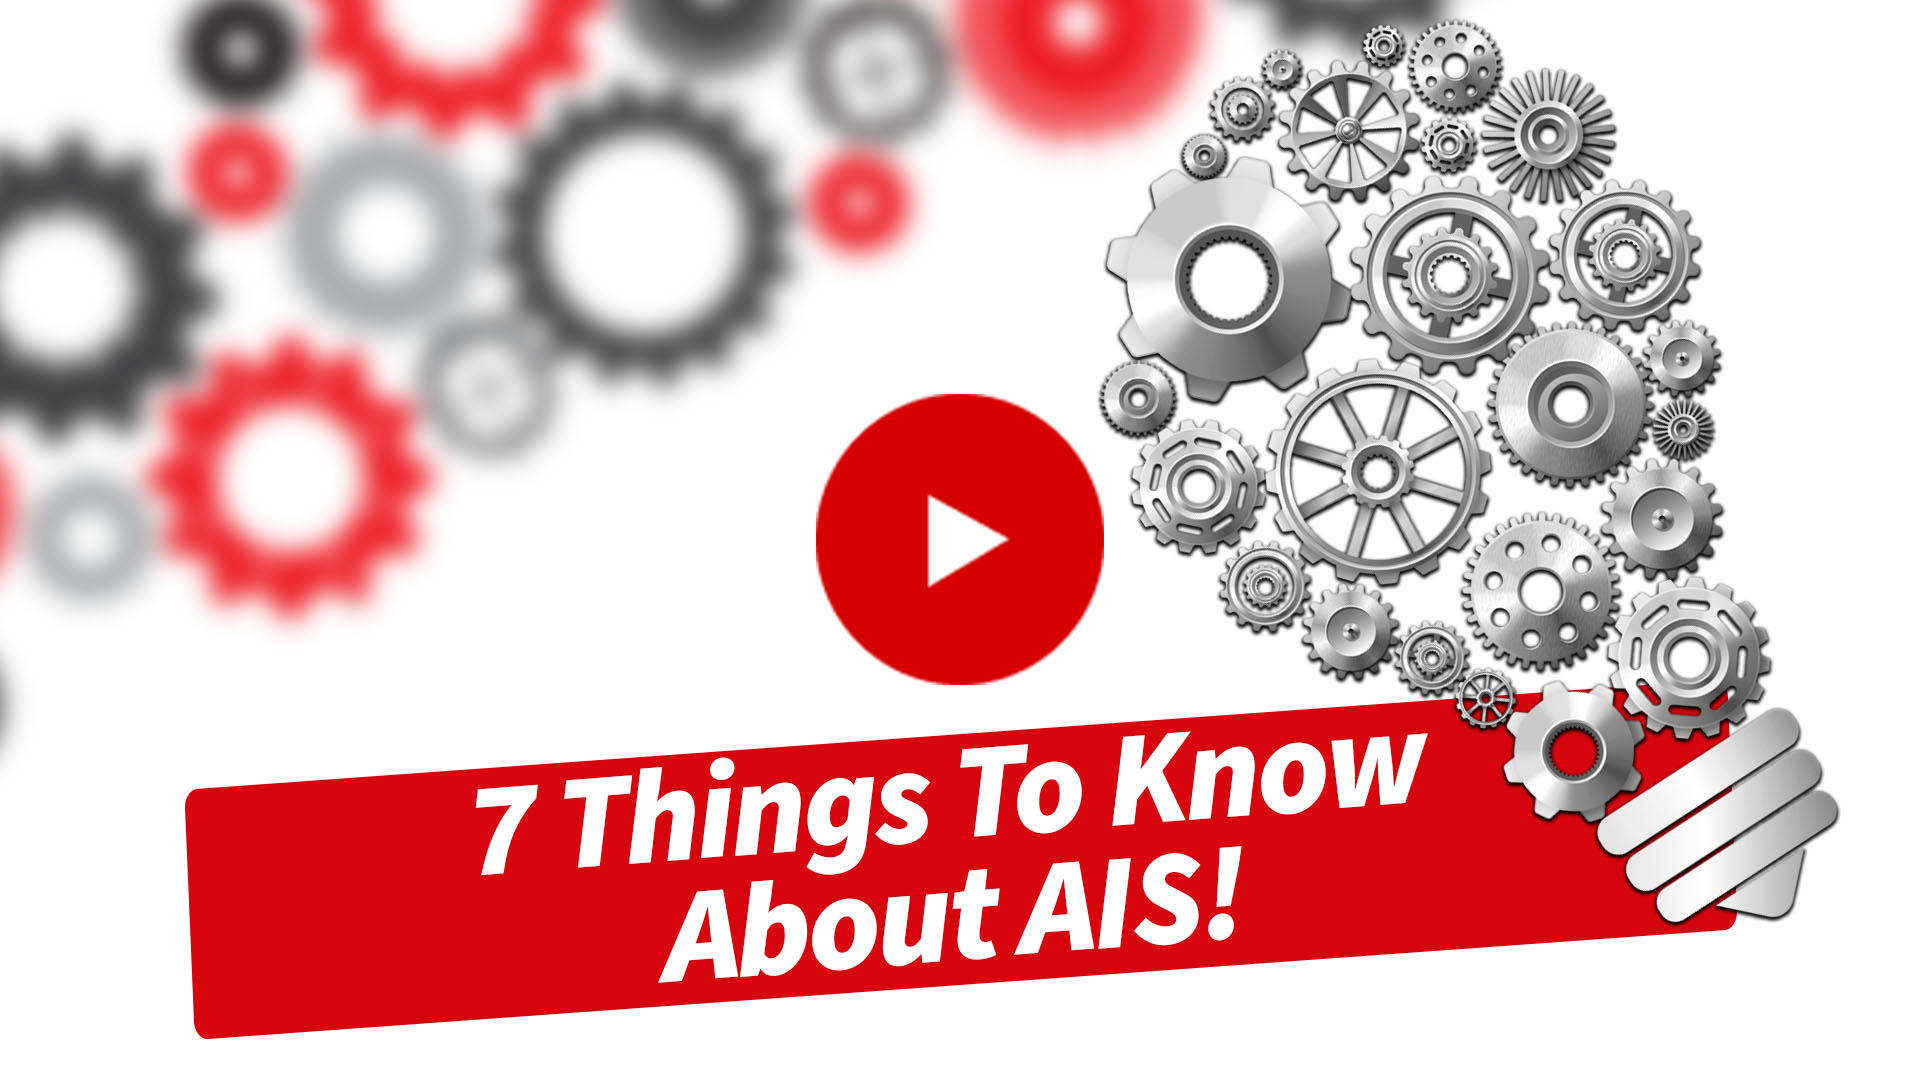 7 Things to Know About AIS | Worry Less With AIS